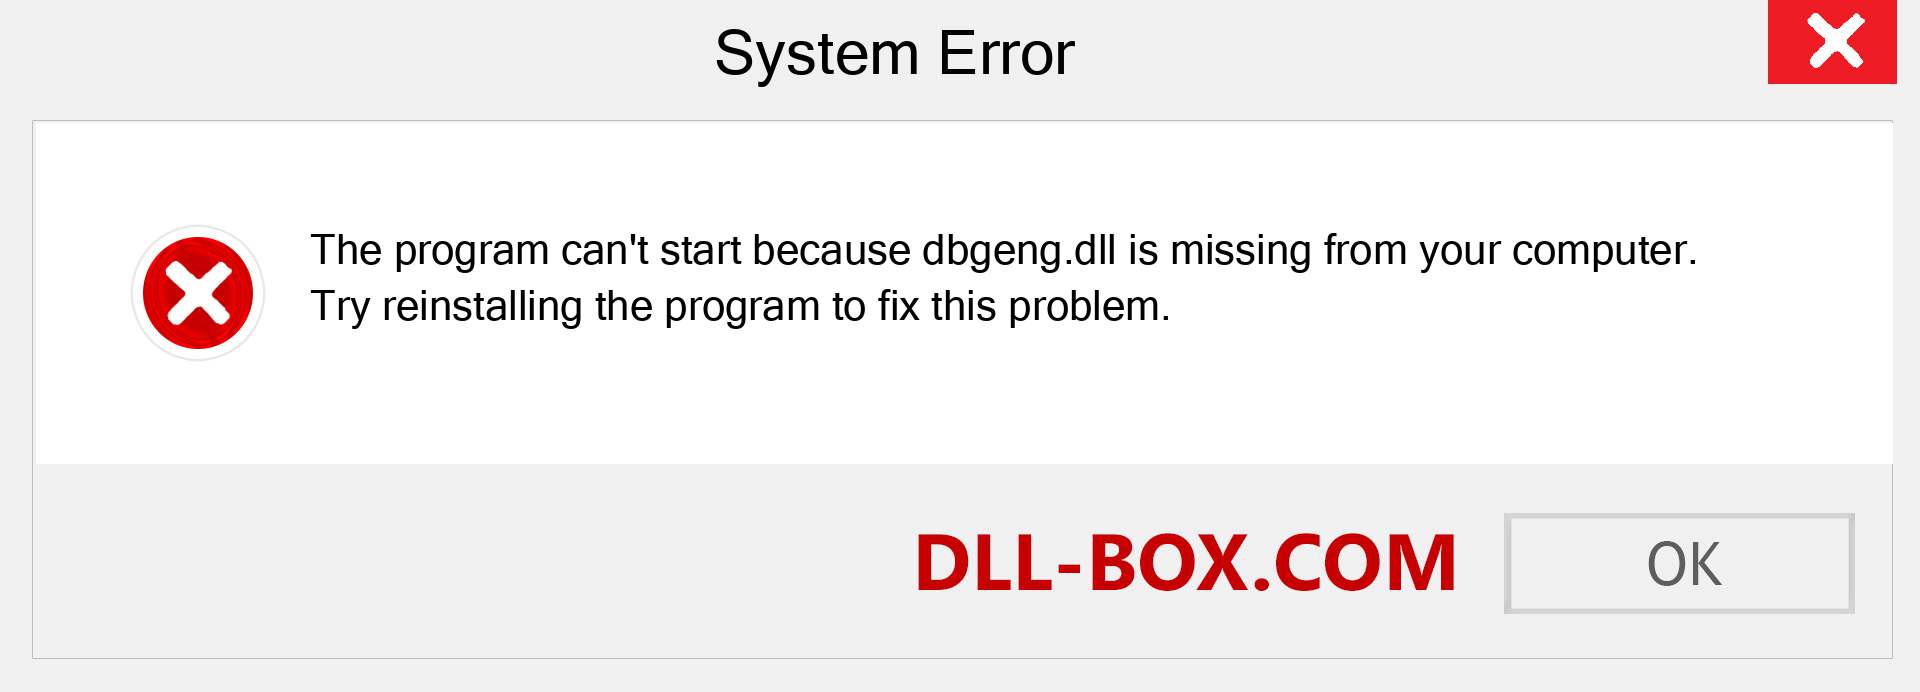  dbgeng.dll file is missing?. Download for Windows 7, 8, 10 - Fix  dbgeng dll Missing Error on Windows, photos, images